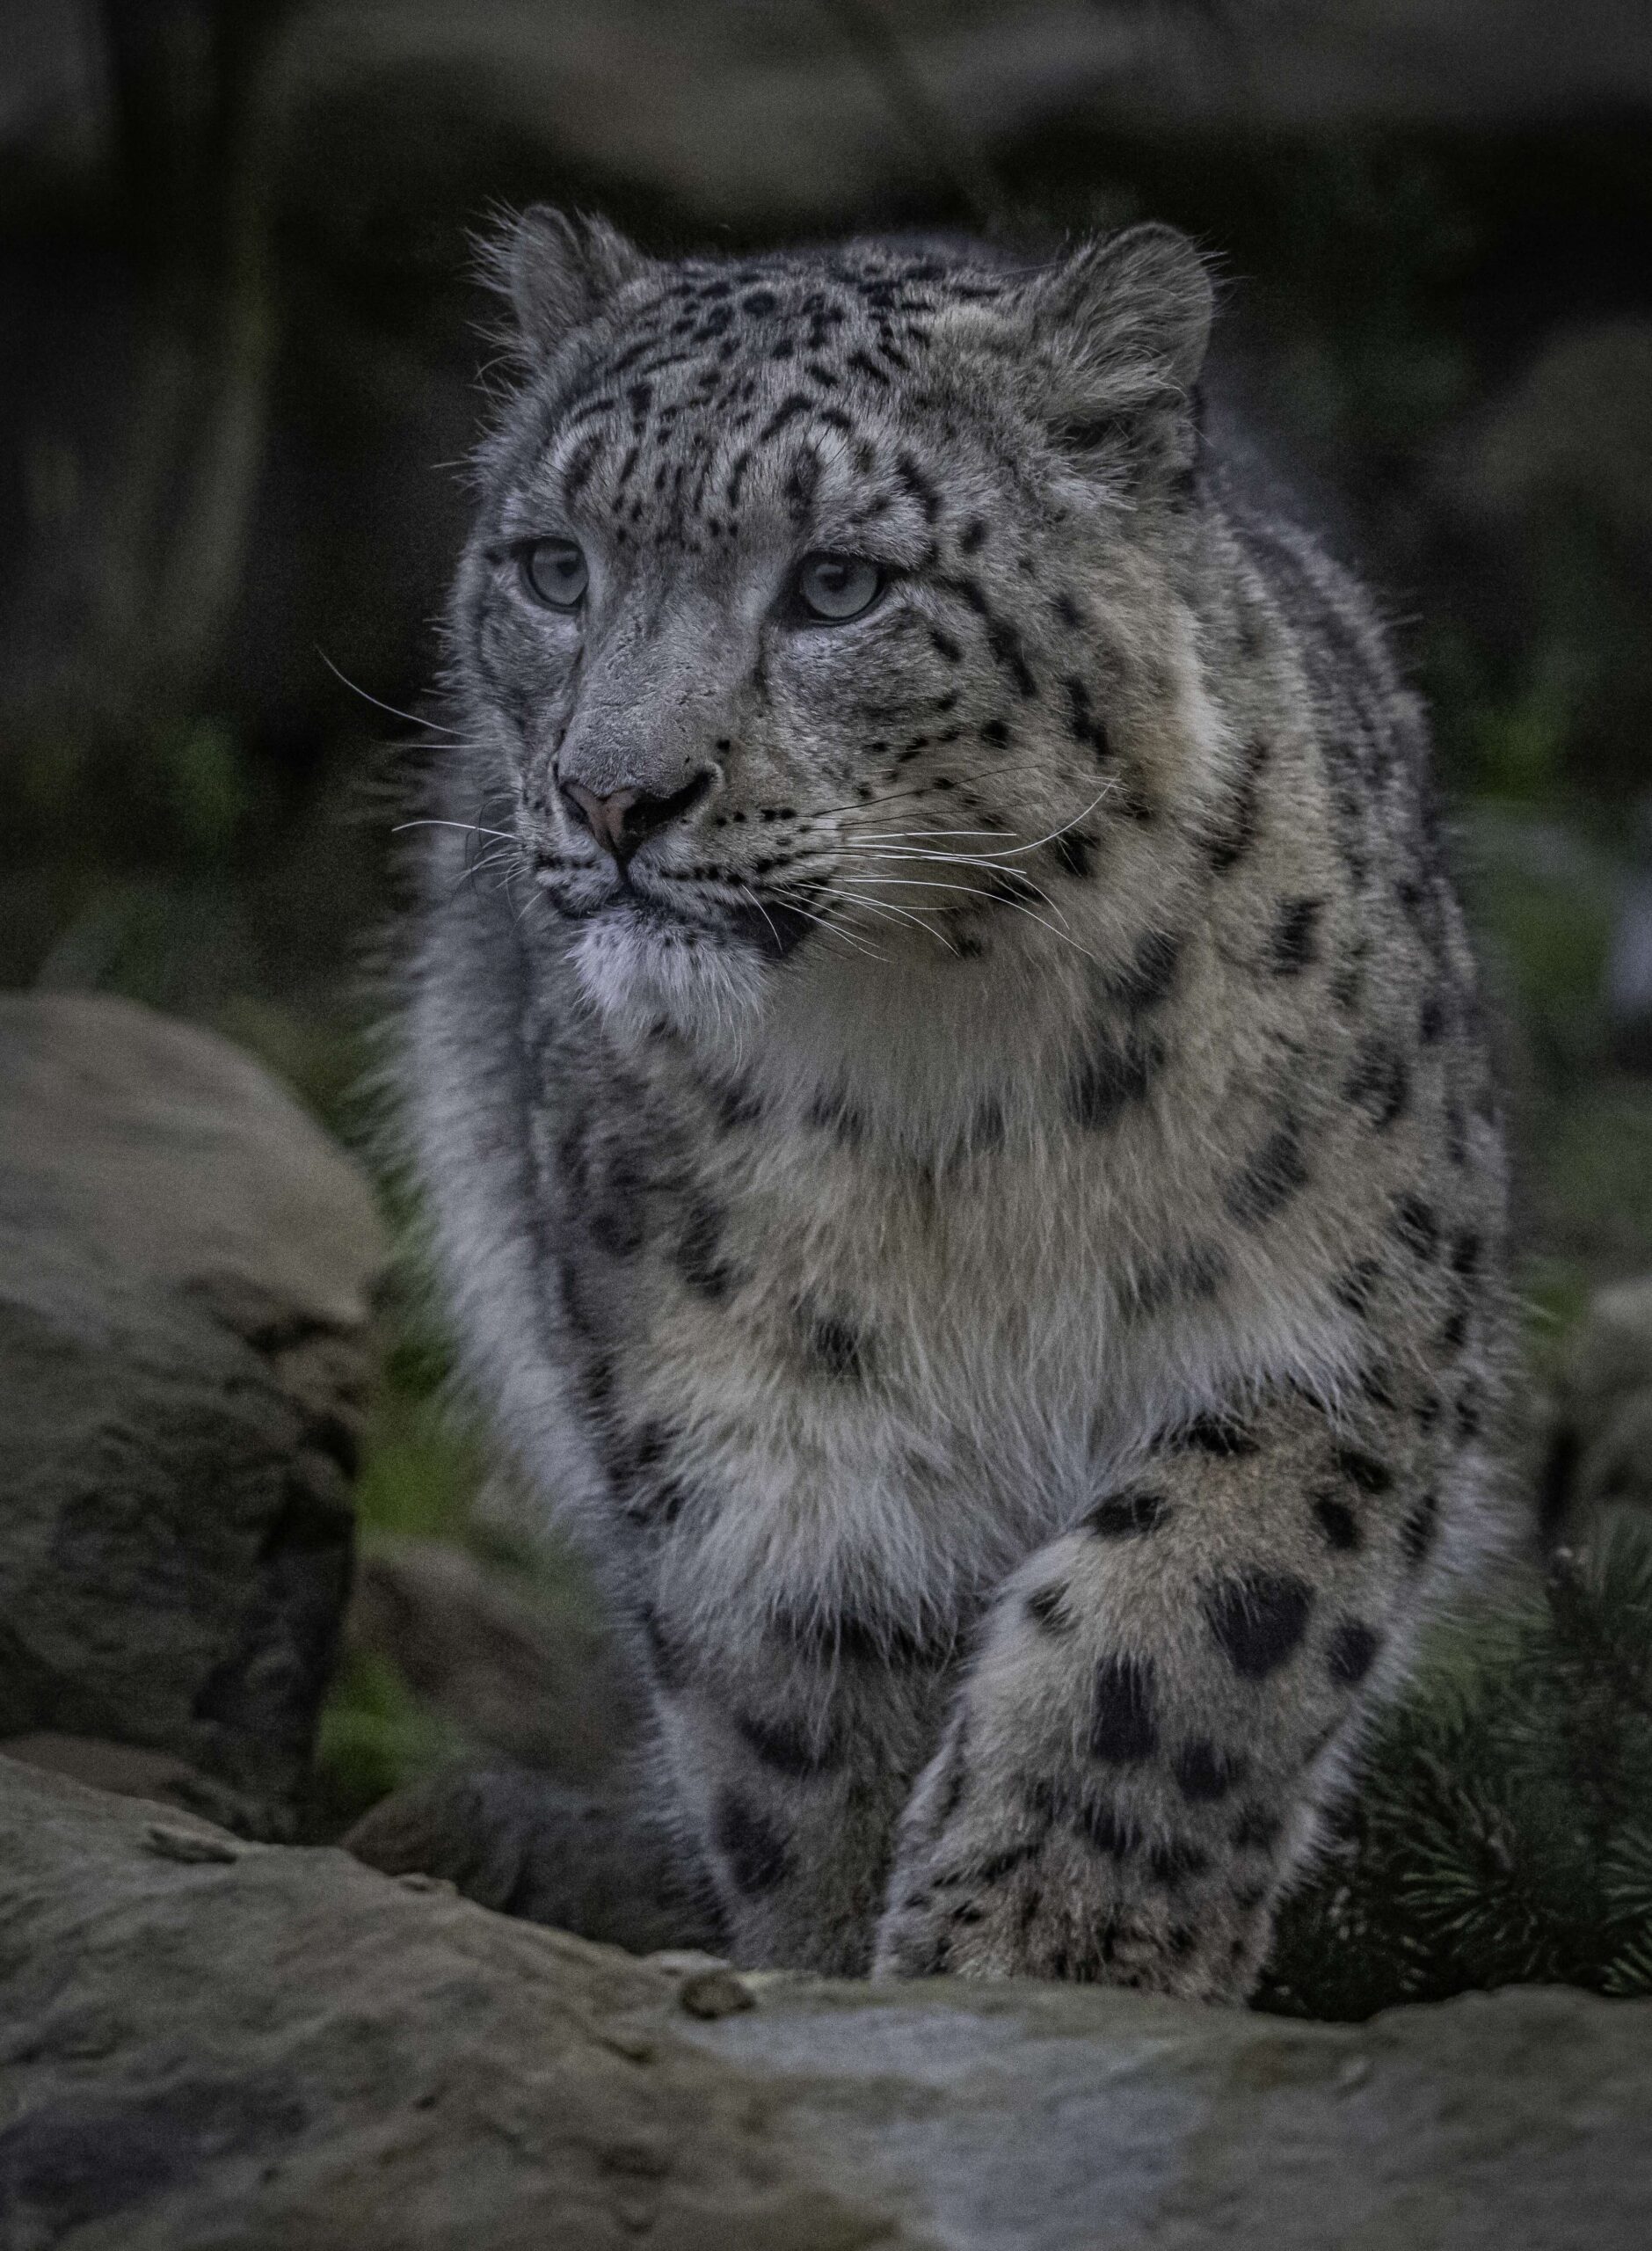 Chester Zoo has created a habitat that mimics their natural home in the Himalayas